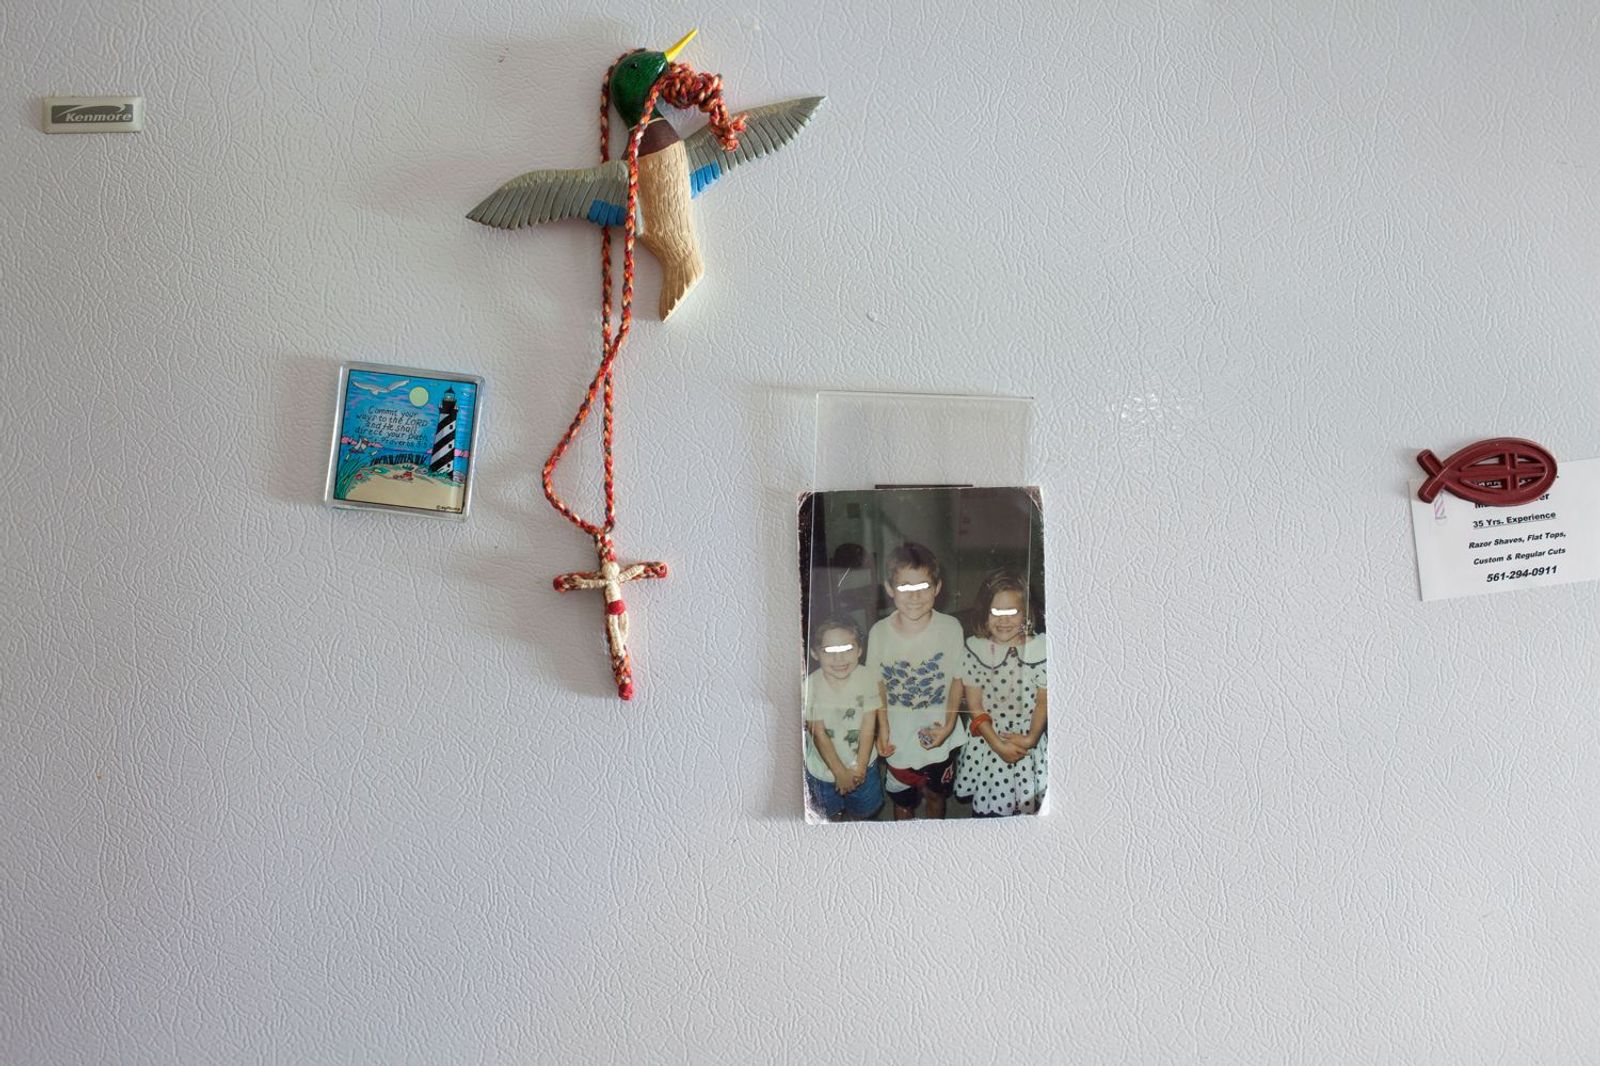 © Sofia Valiente - Rose's refrigerator with an image of her kids. The last time she saw them was many years ago.